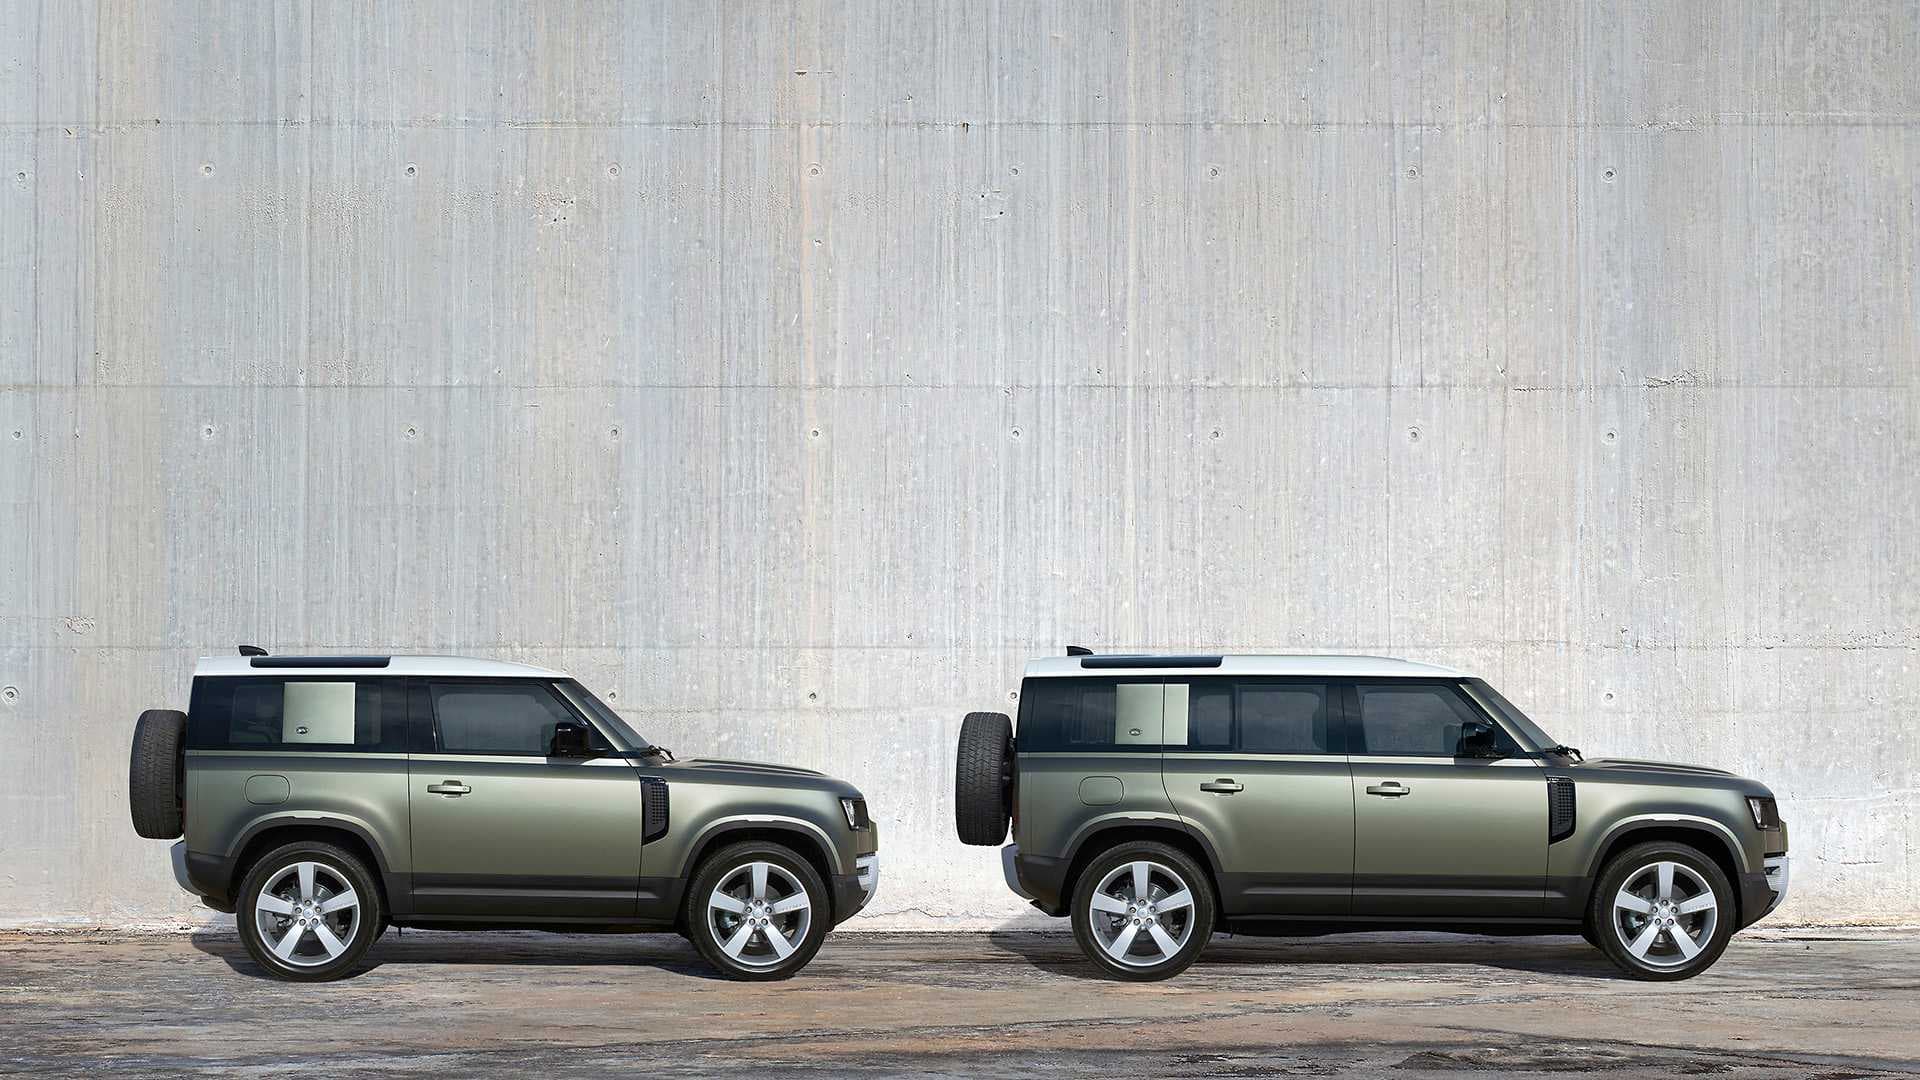 You Can Now Buy a New Land Rover Defender in the US After a 23-Year Absence